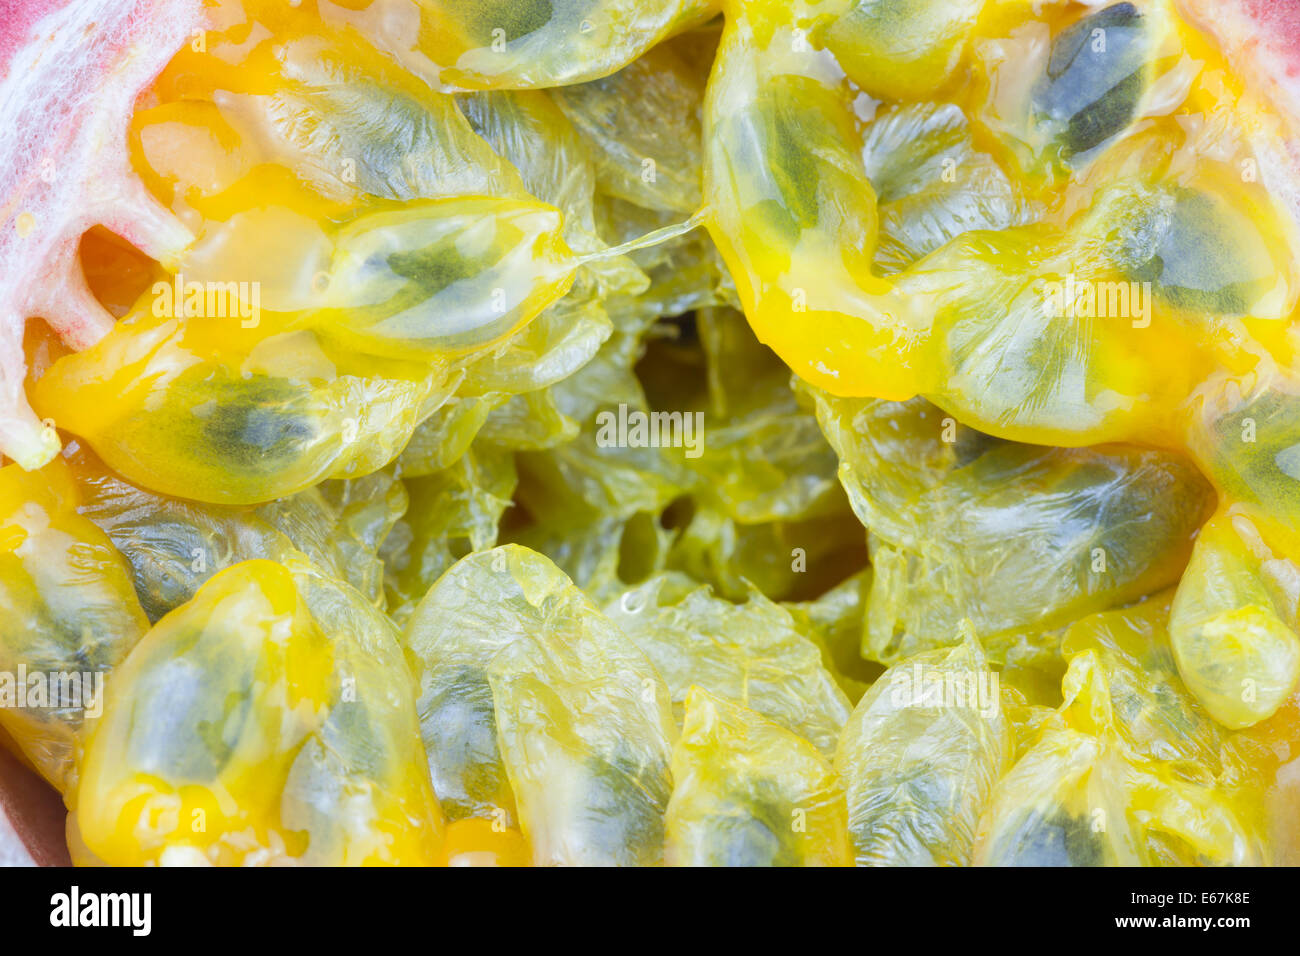 Passion fruit cross section Stock Photo